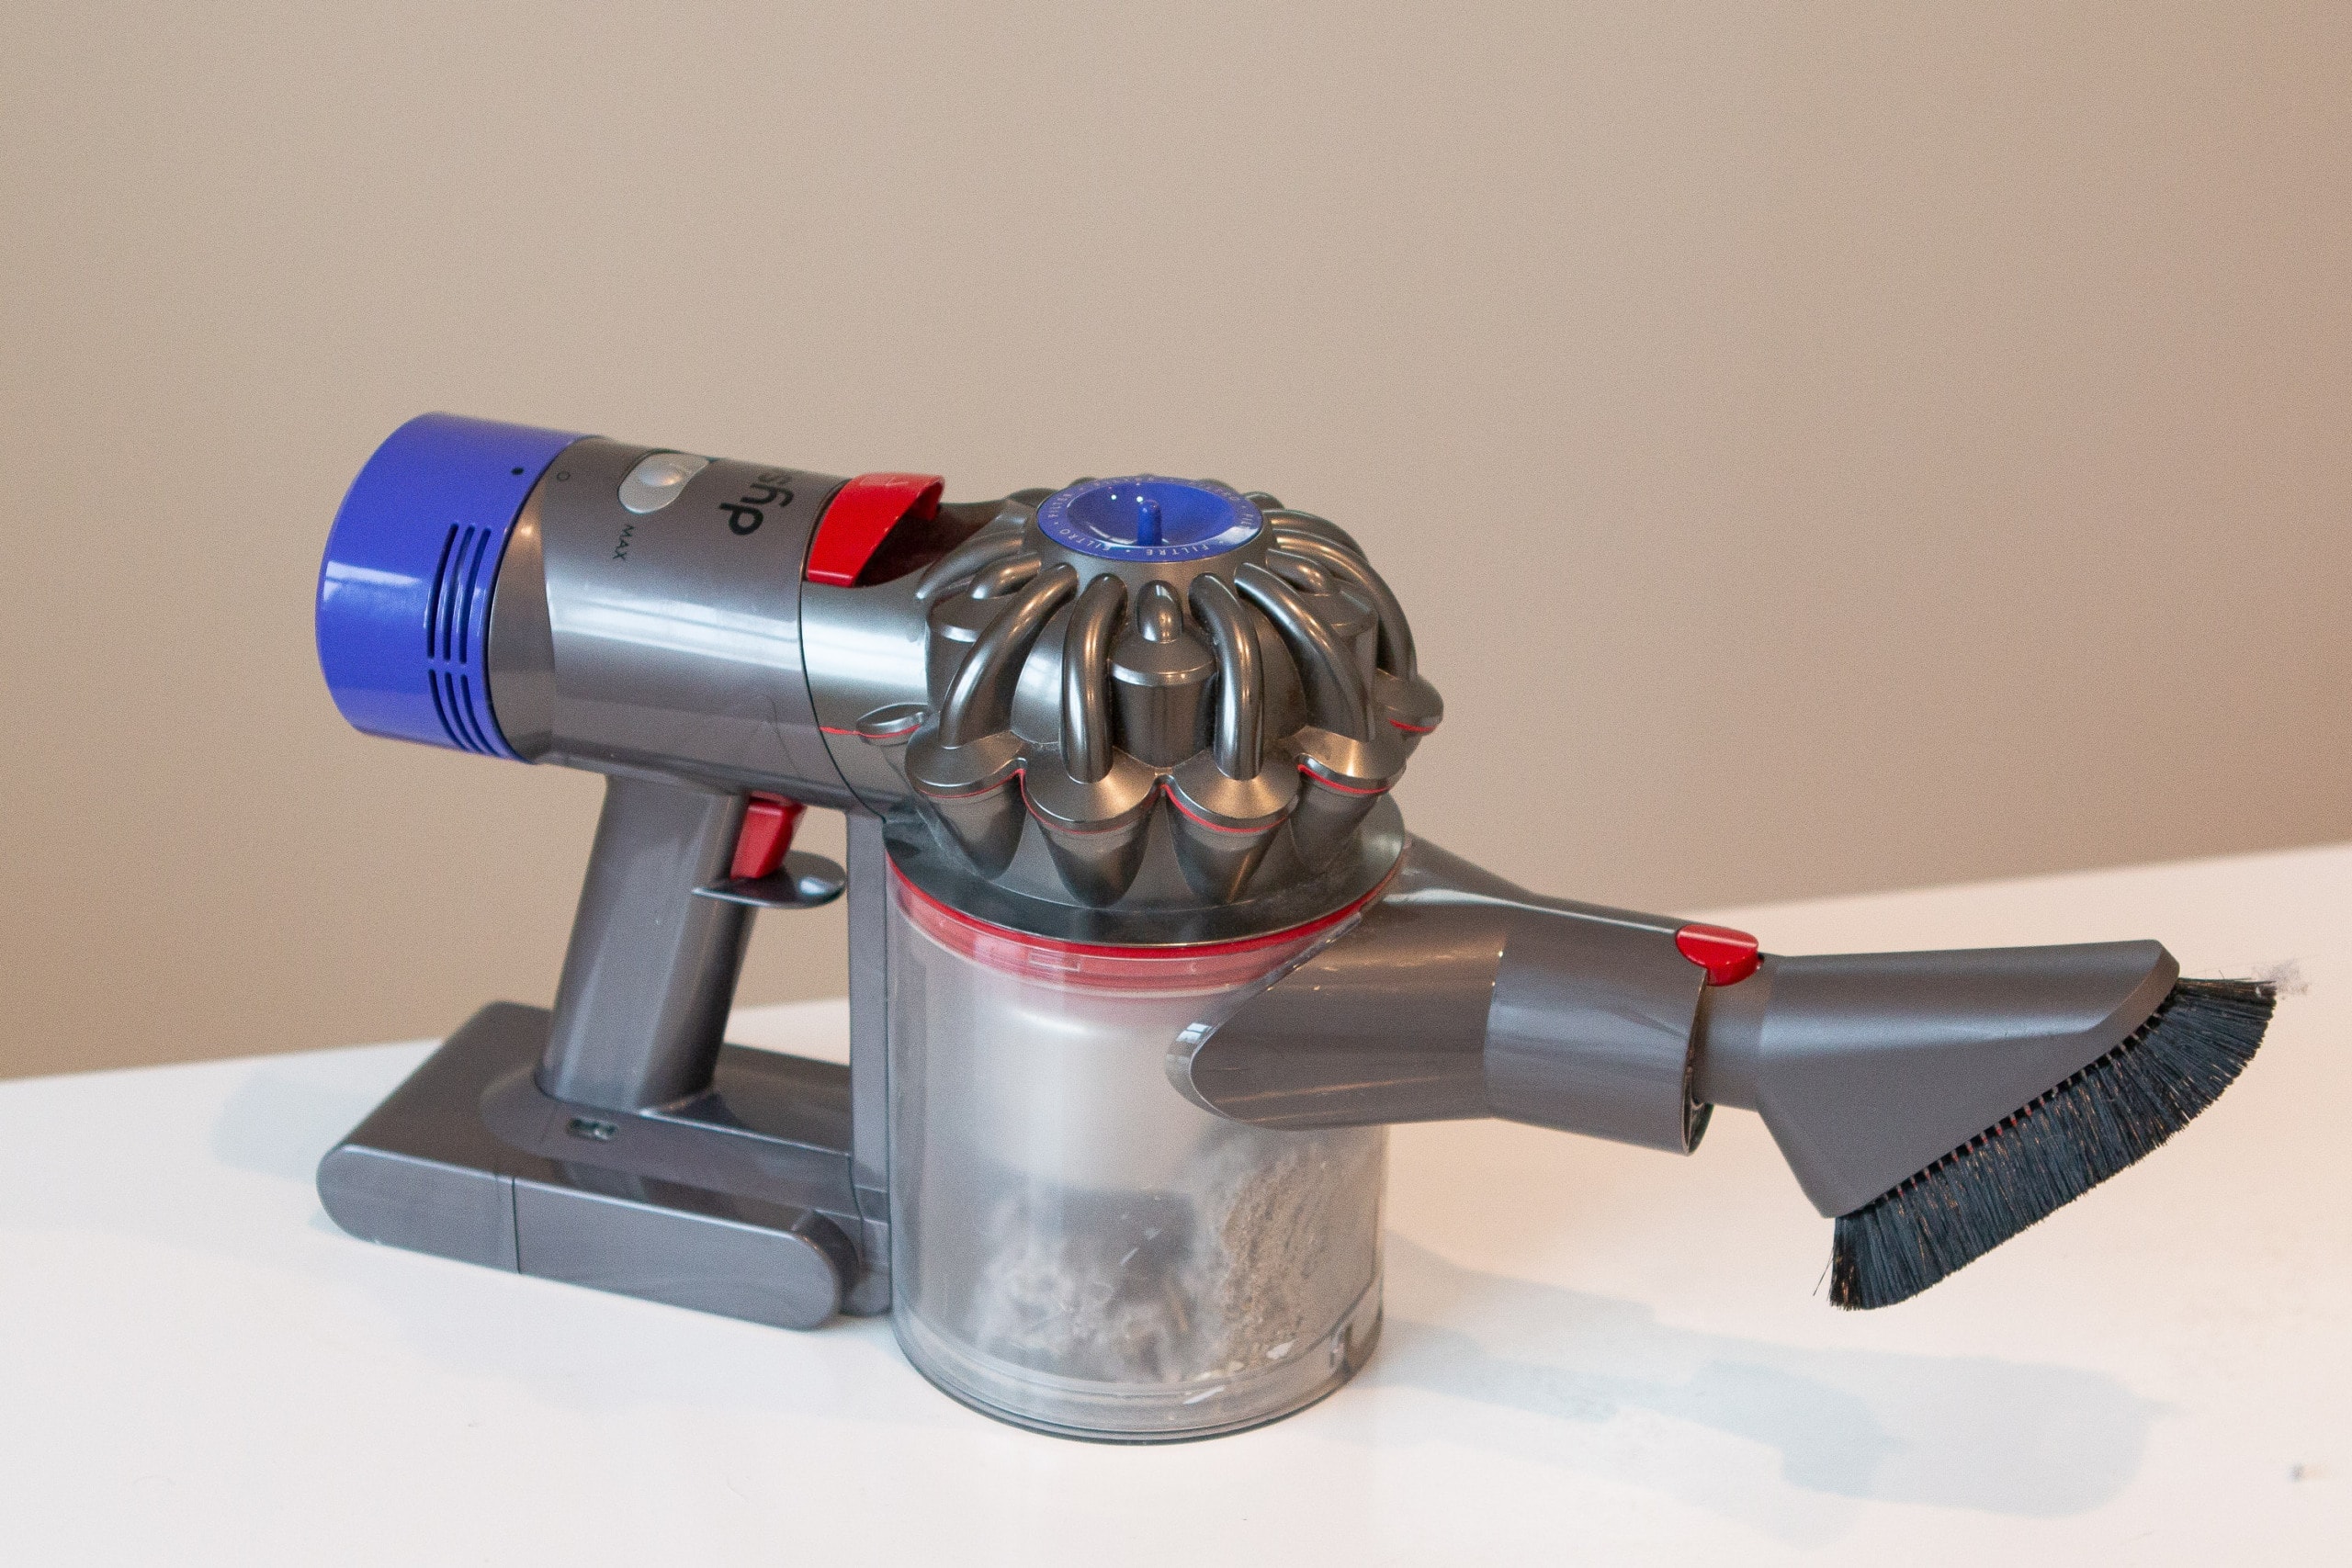 Dyson vacuum to get dust bunnies behind the bed